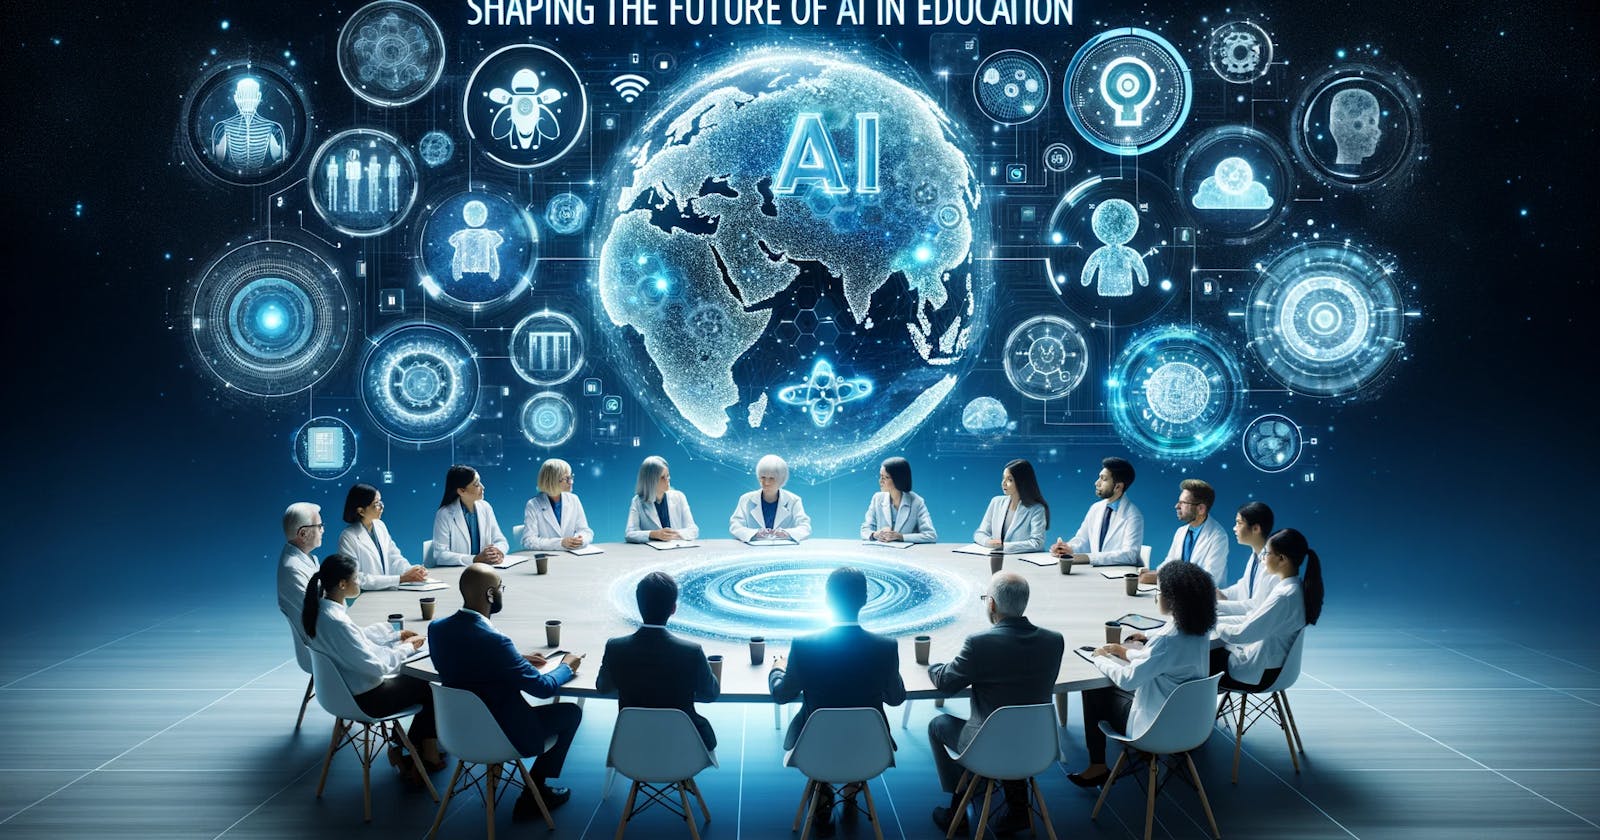 Shaping the Future of AI in Education: Insights from Top Scientists from Around the World